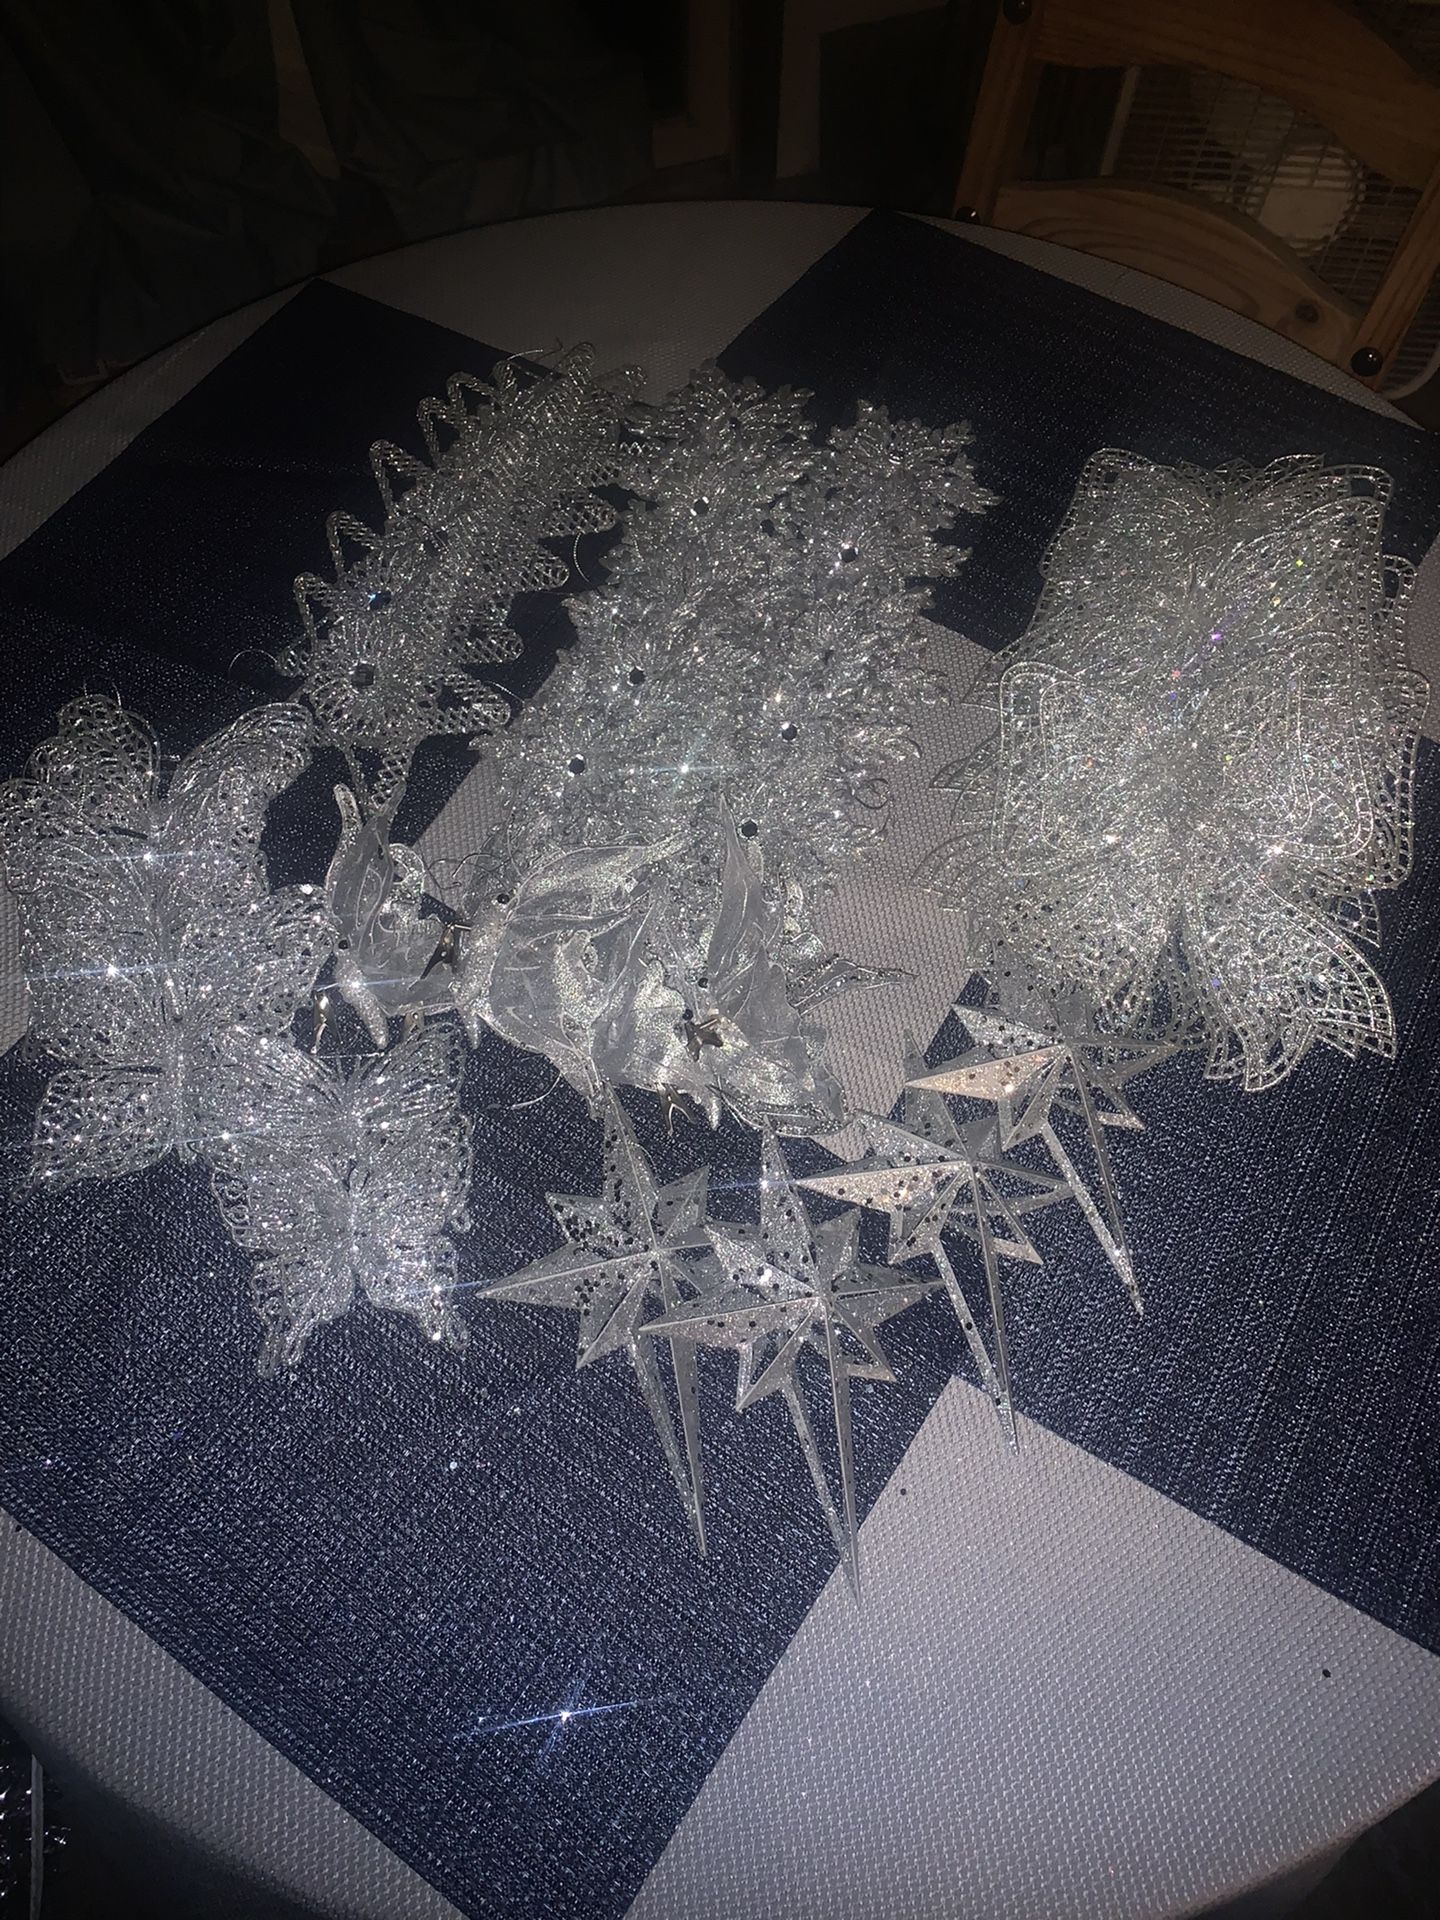 45 ASSORTED SILVER CHRISTMAS DECORATIONS